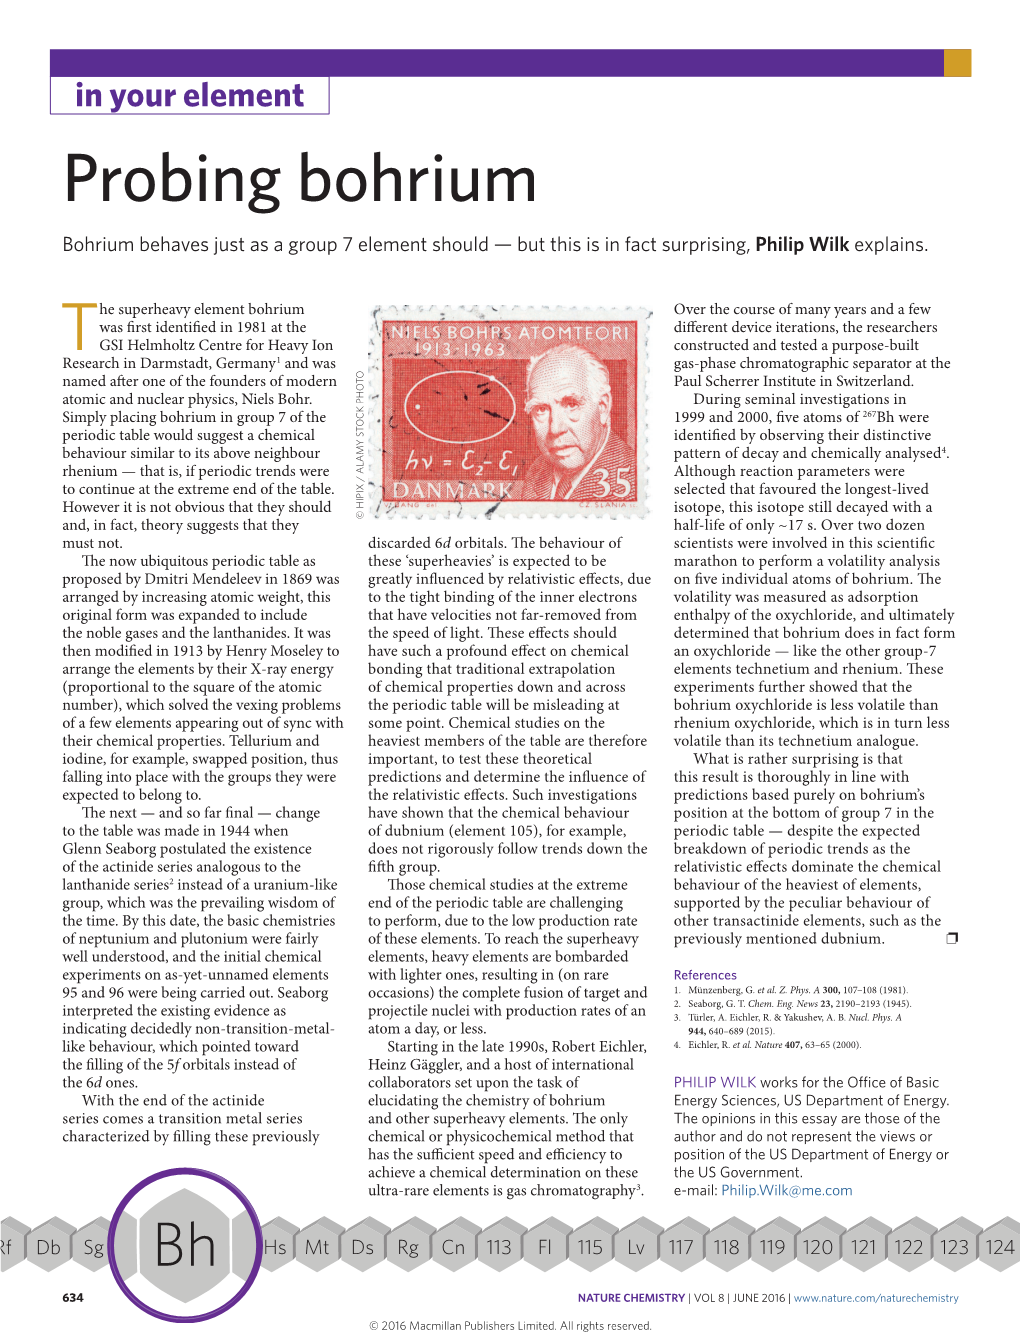 Probing Bohrium Bohrium Behaves Just As a Group 7 Element Should — but This Is in Fact Surprising, Philip Wilk Explains